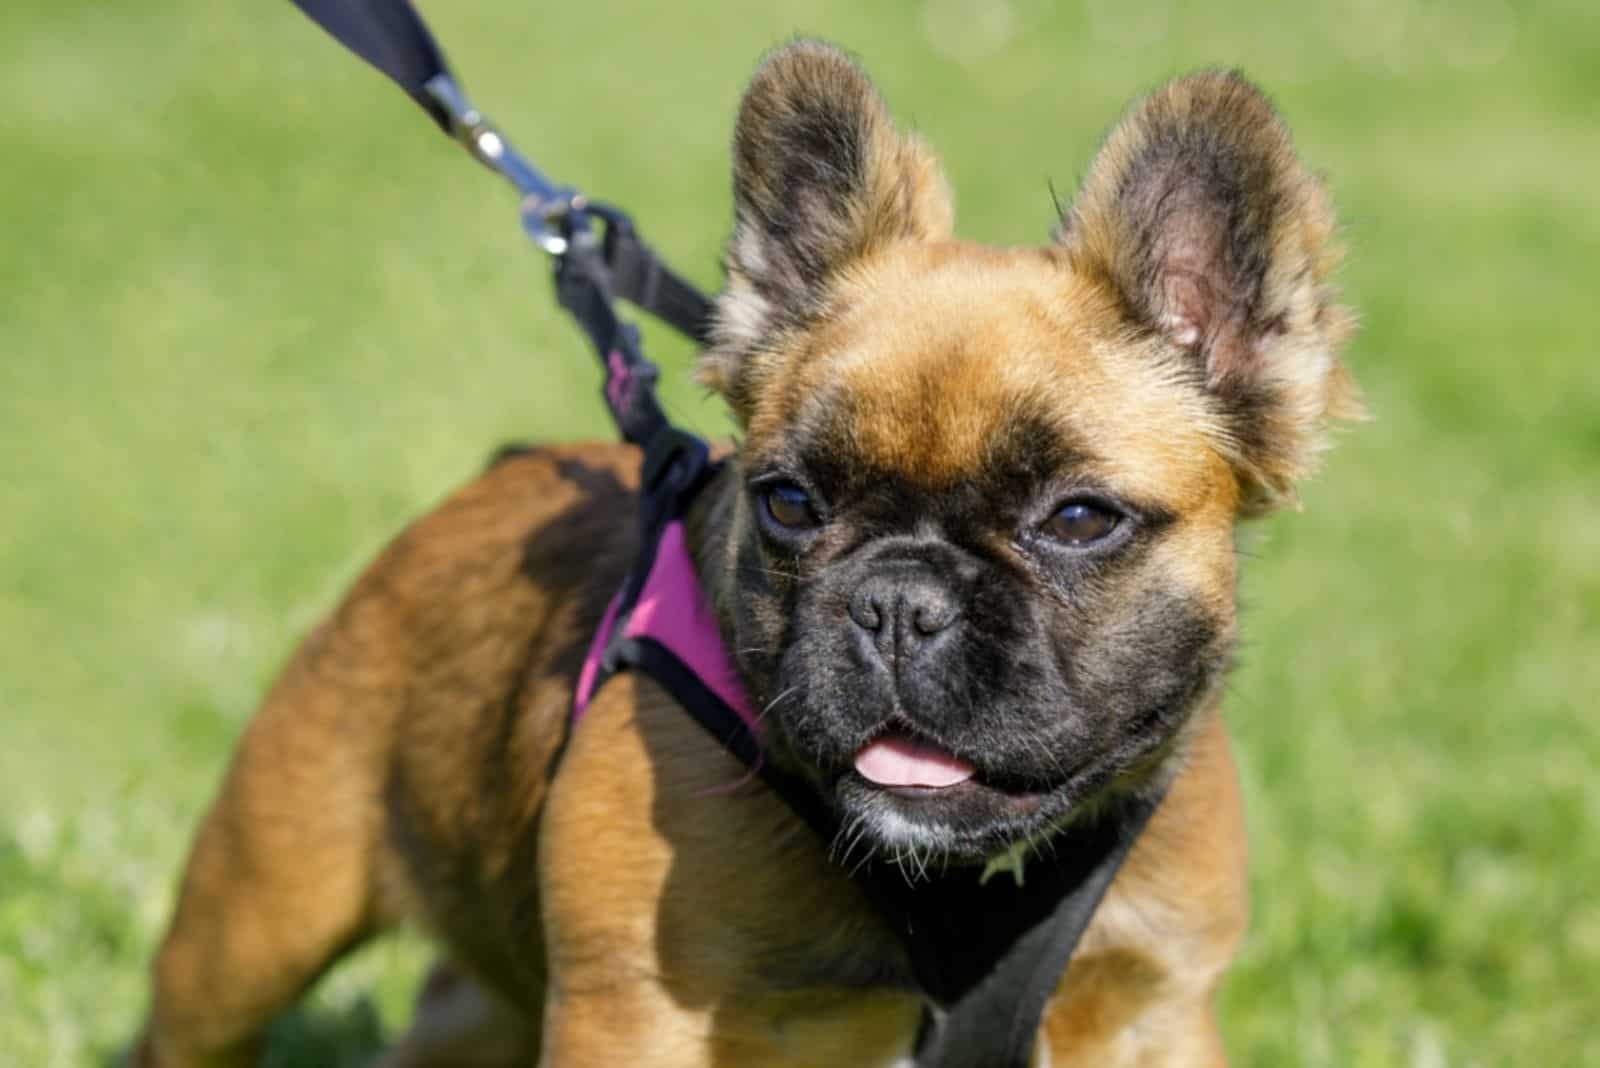 a long-haired French bulldog on a leash